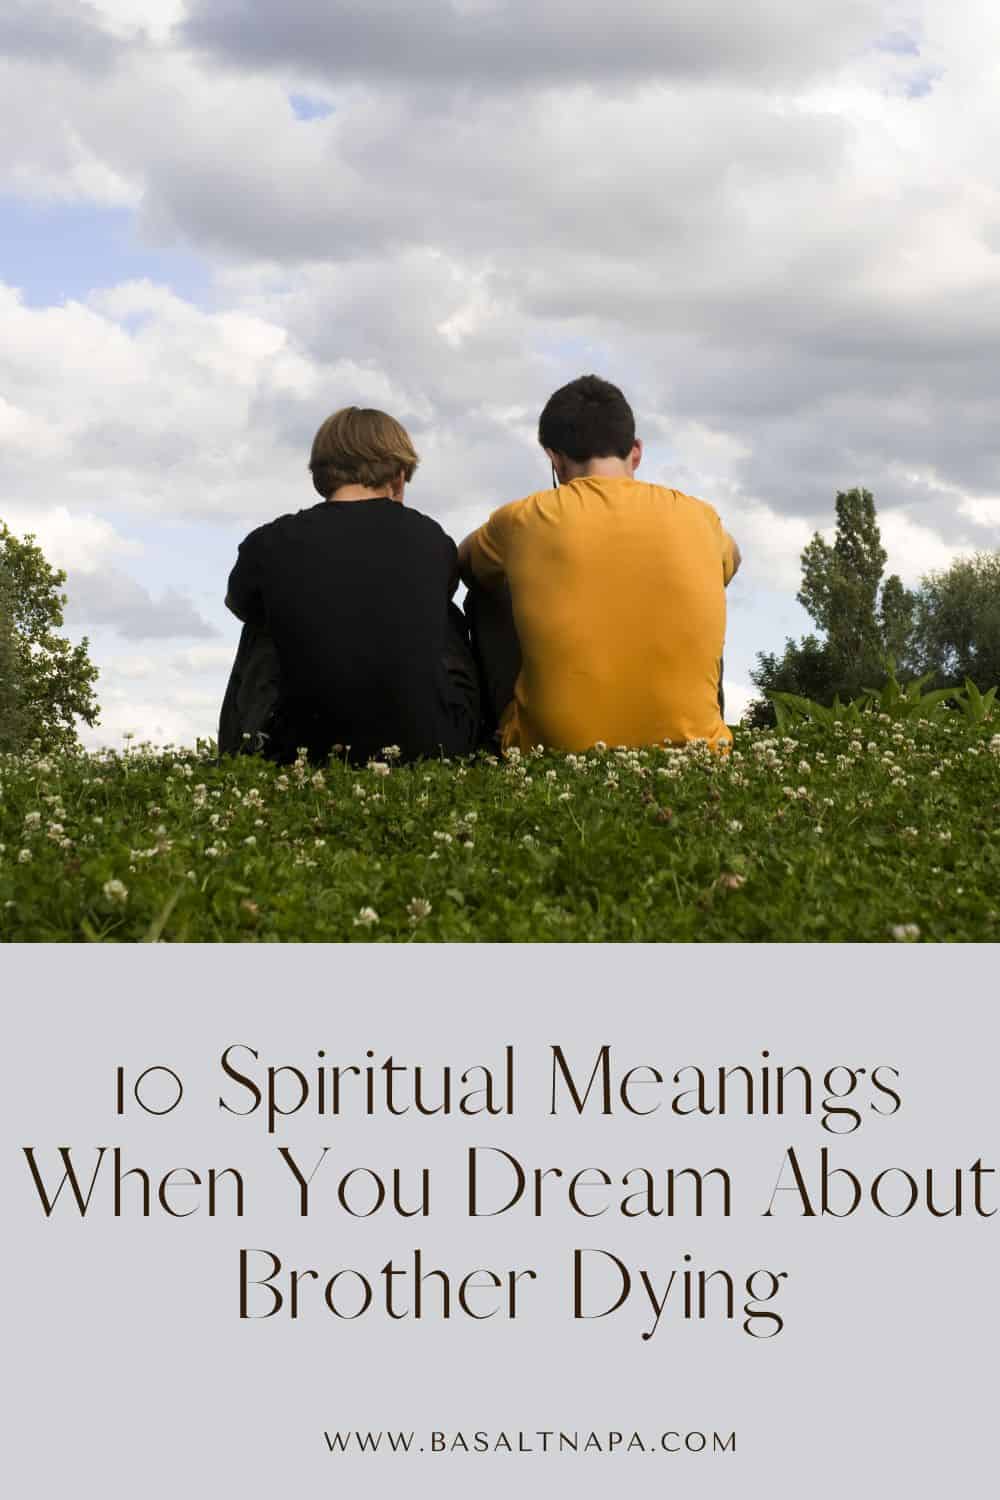 10 Spiritual Meanings When You Dream About Brother Dying